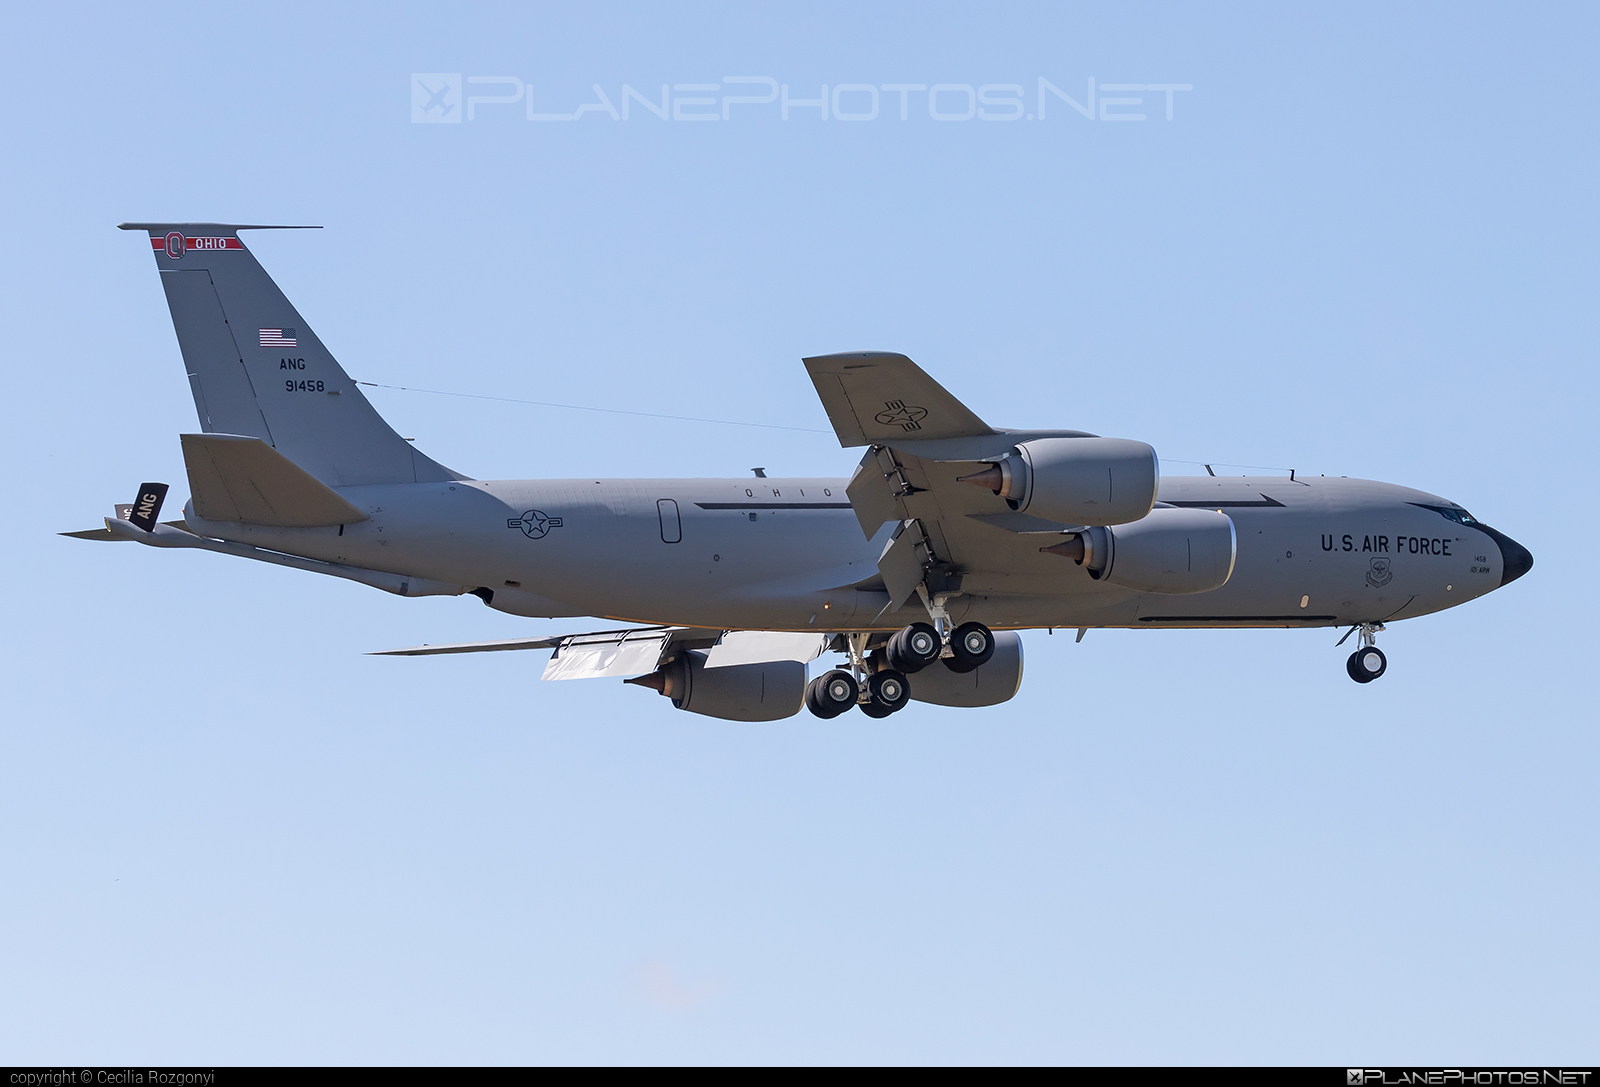 Boeing KC-135R Stratotanker - 59-1458 operated by US Air Force (USAF) #boeing #kc135 #kc135r #kc135stratotanker #stratotanker #usaf #usairforce